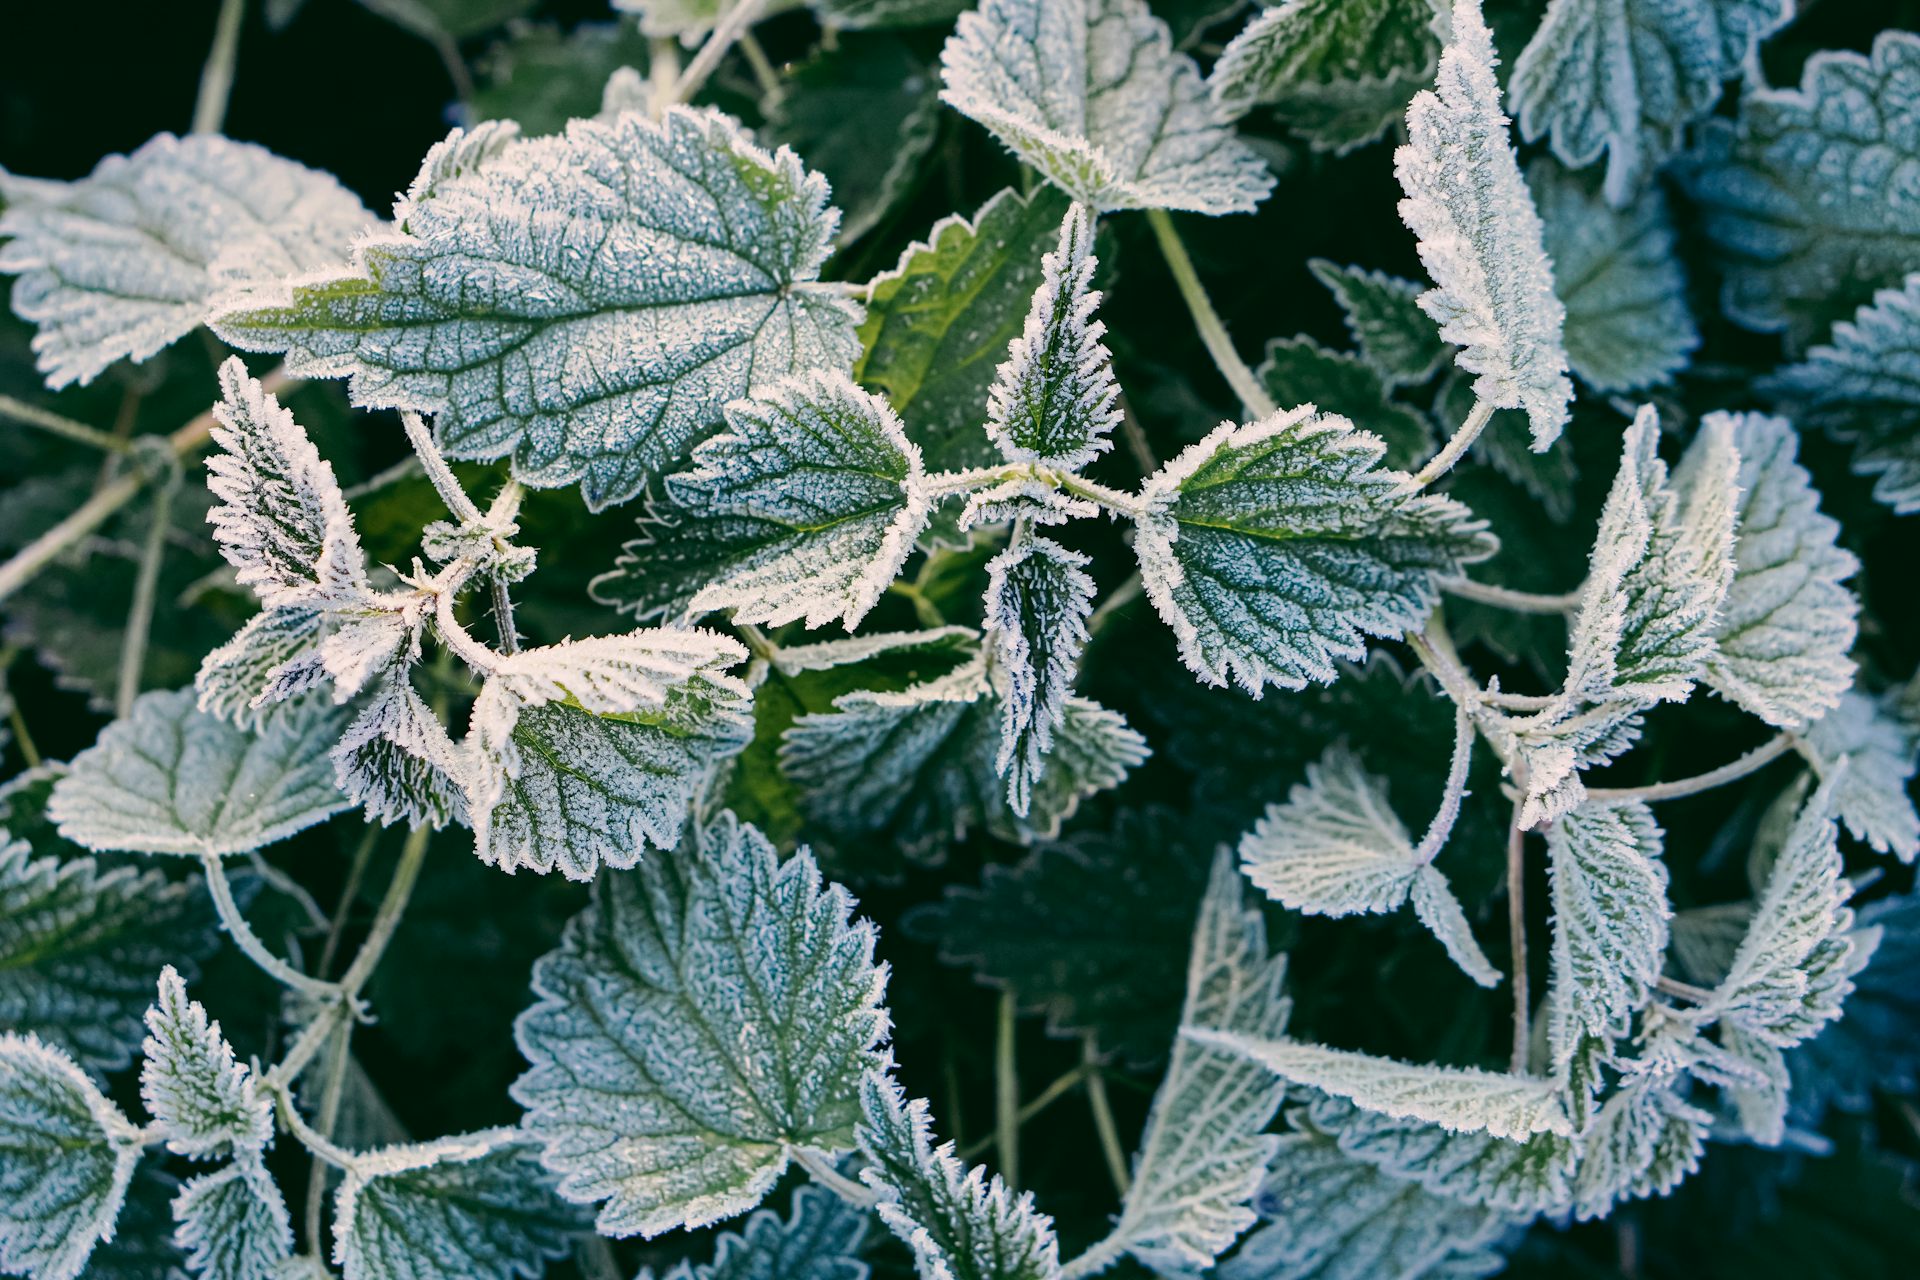 Why we should all learn to love stinging nettles